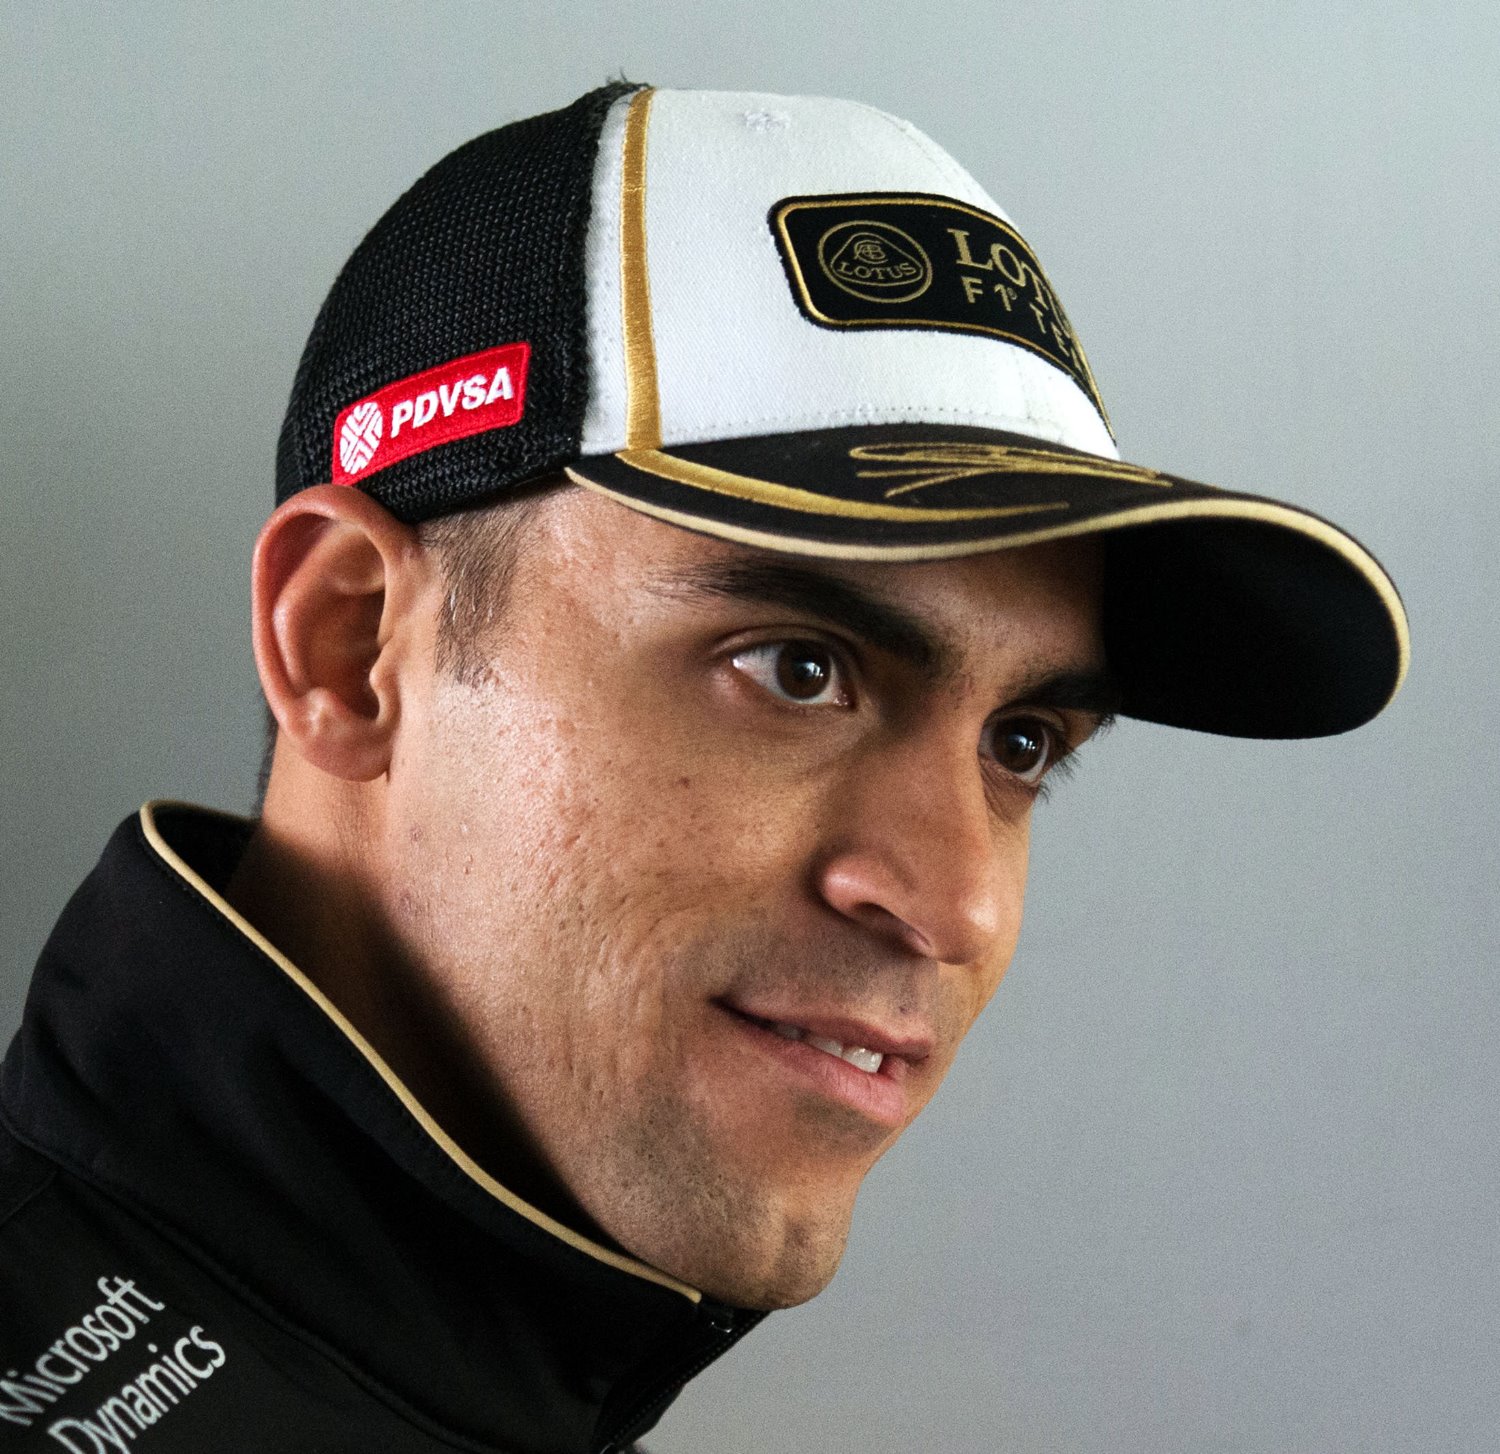 With oil markets in turmoil, it appears unlikely Maldonado can buy his ride at Lotus-Renault this year